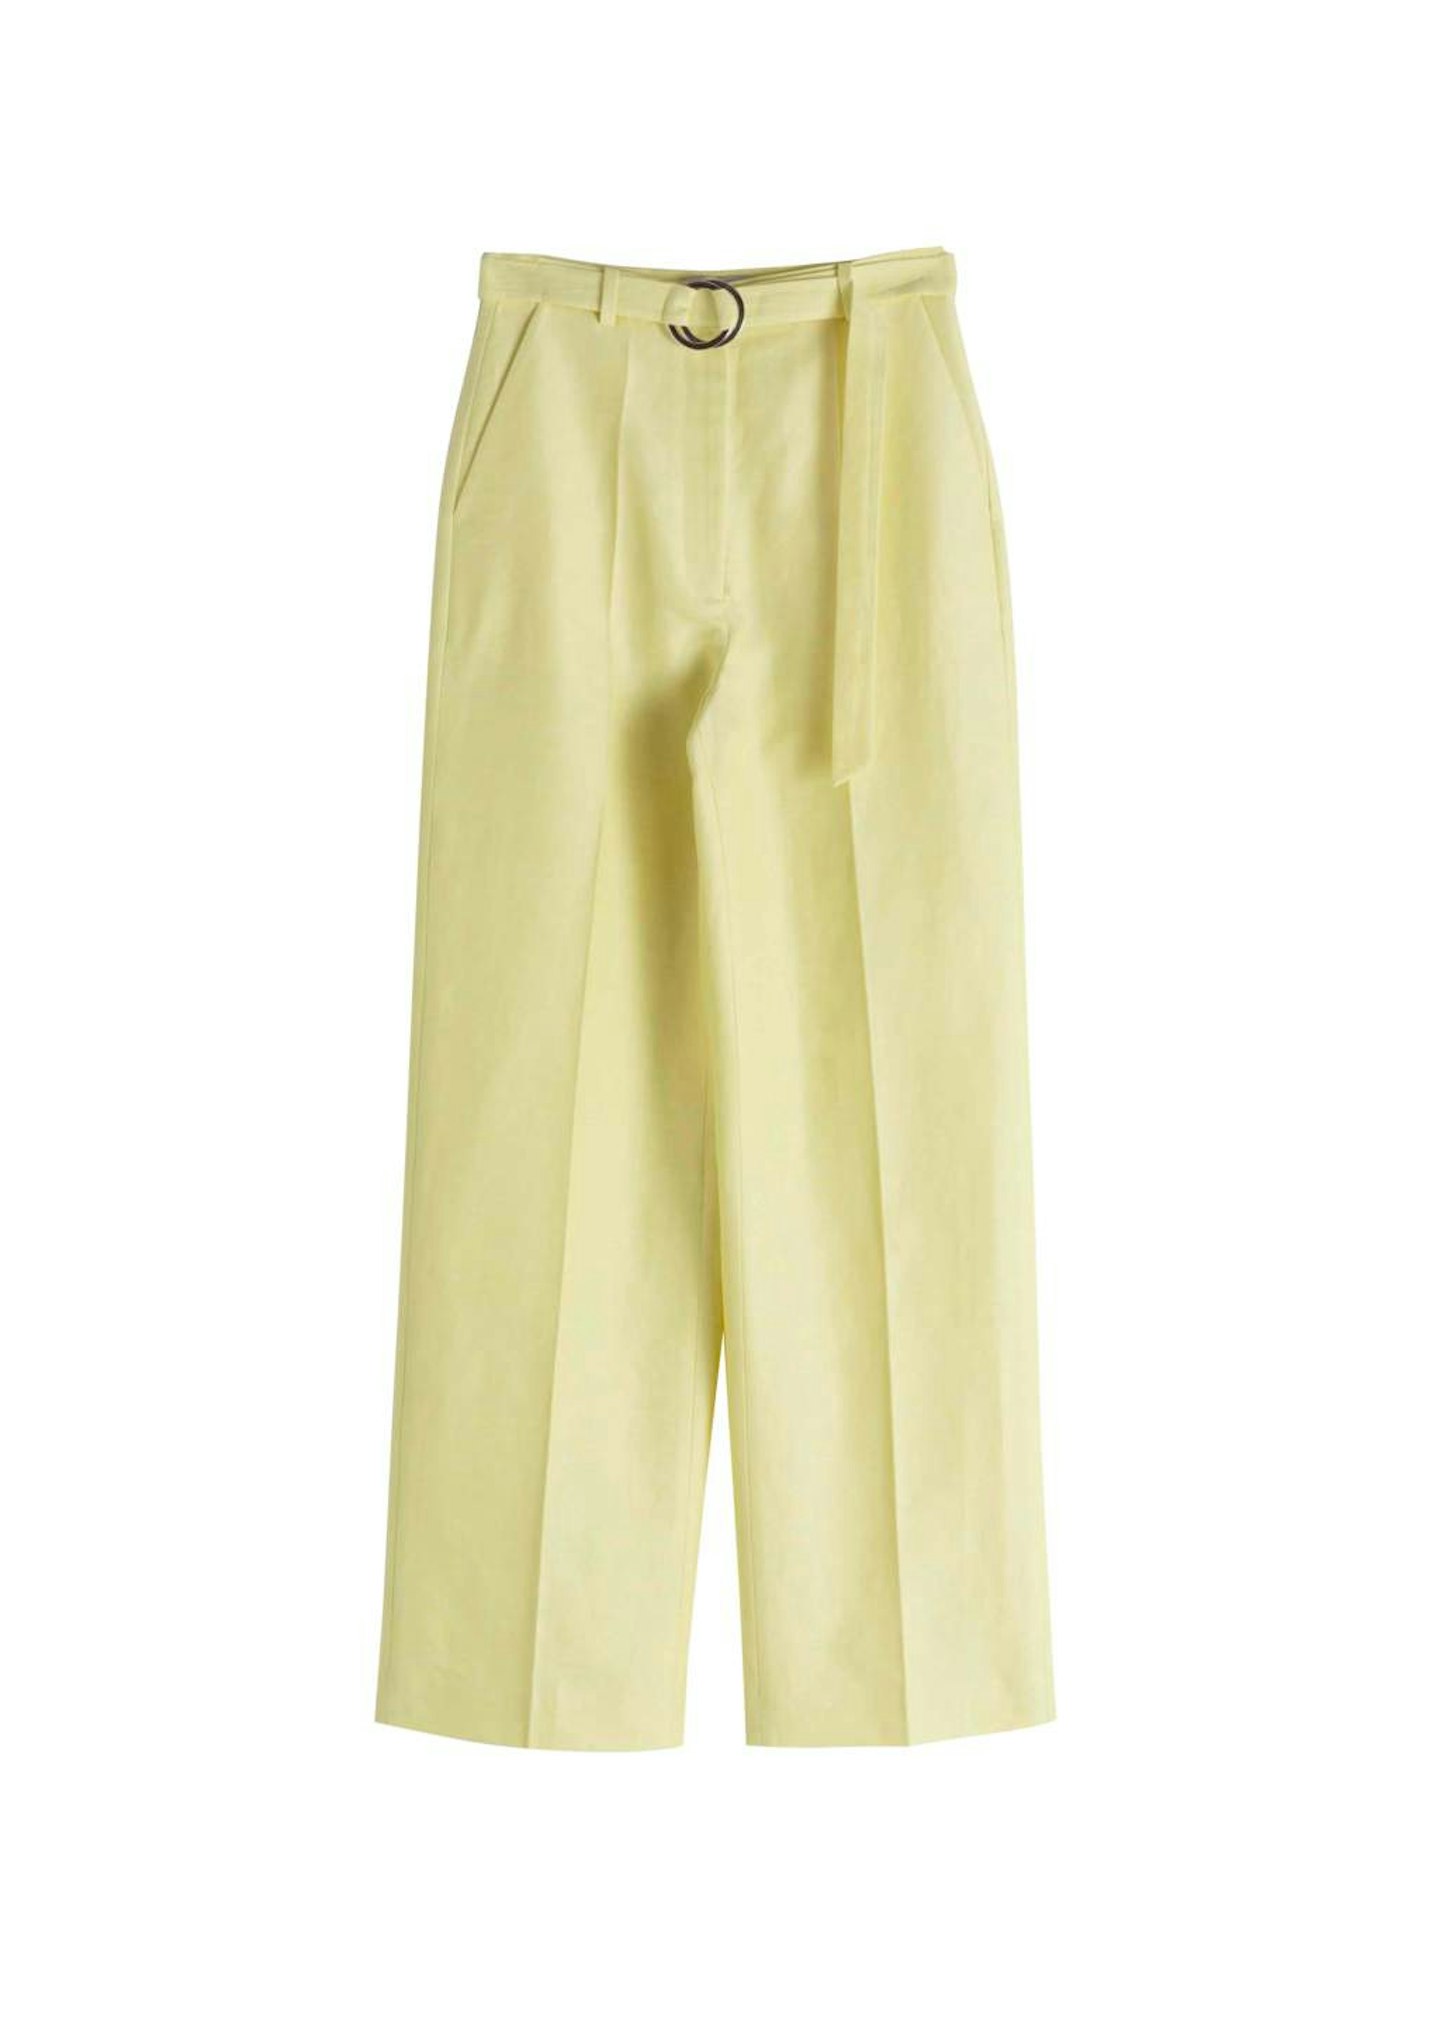 &Other Stories,  Belted Cotton Linen Blend Trousers, £79